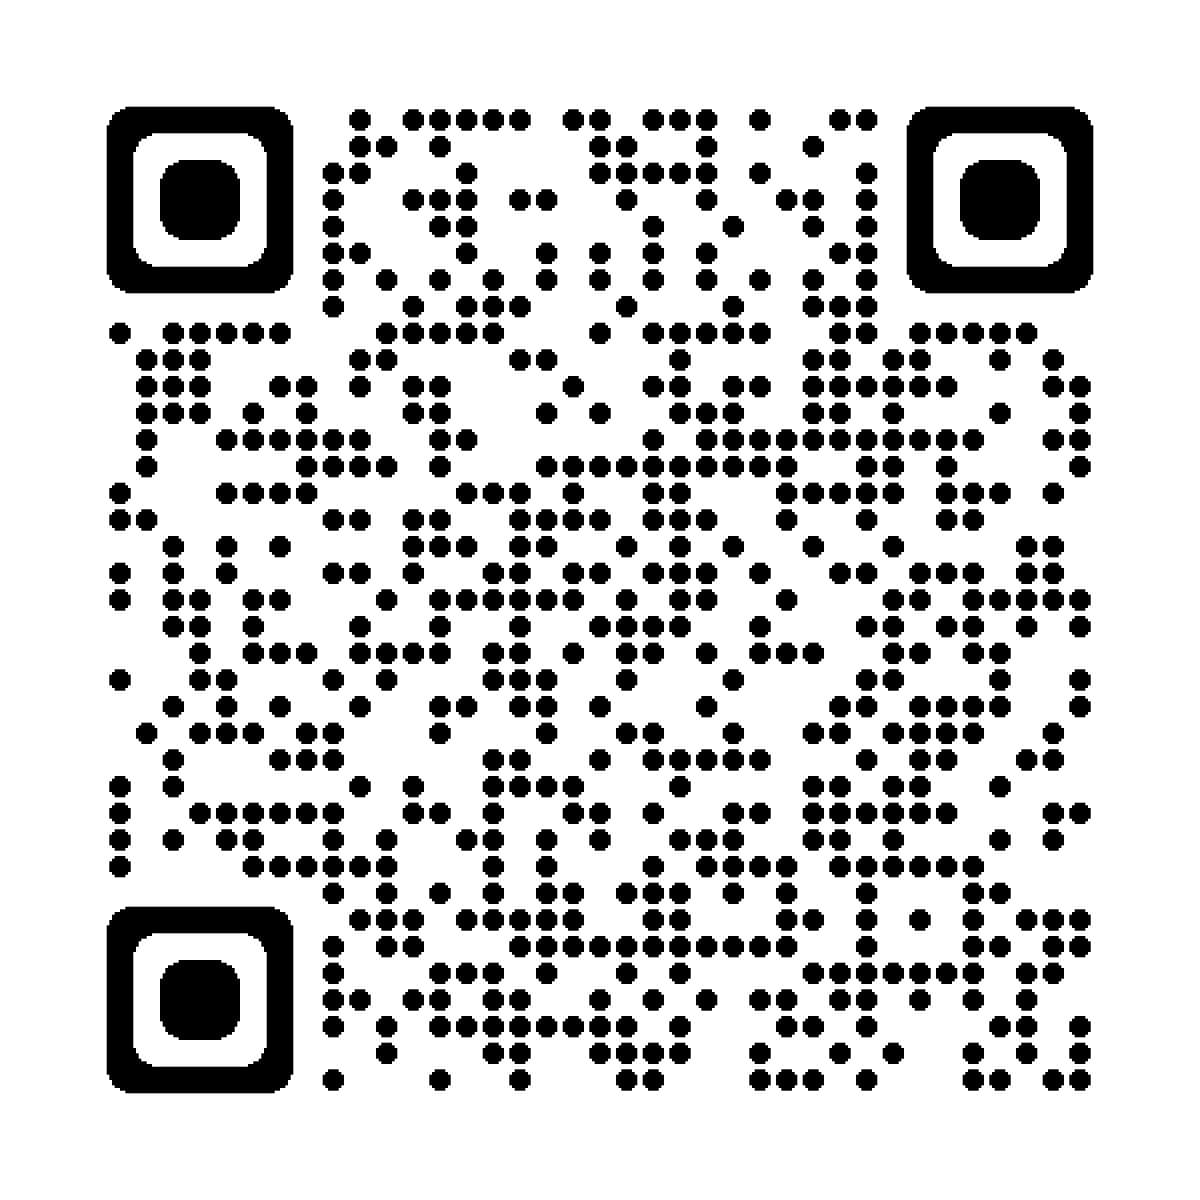 Scan the QR code to watch video 